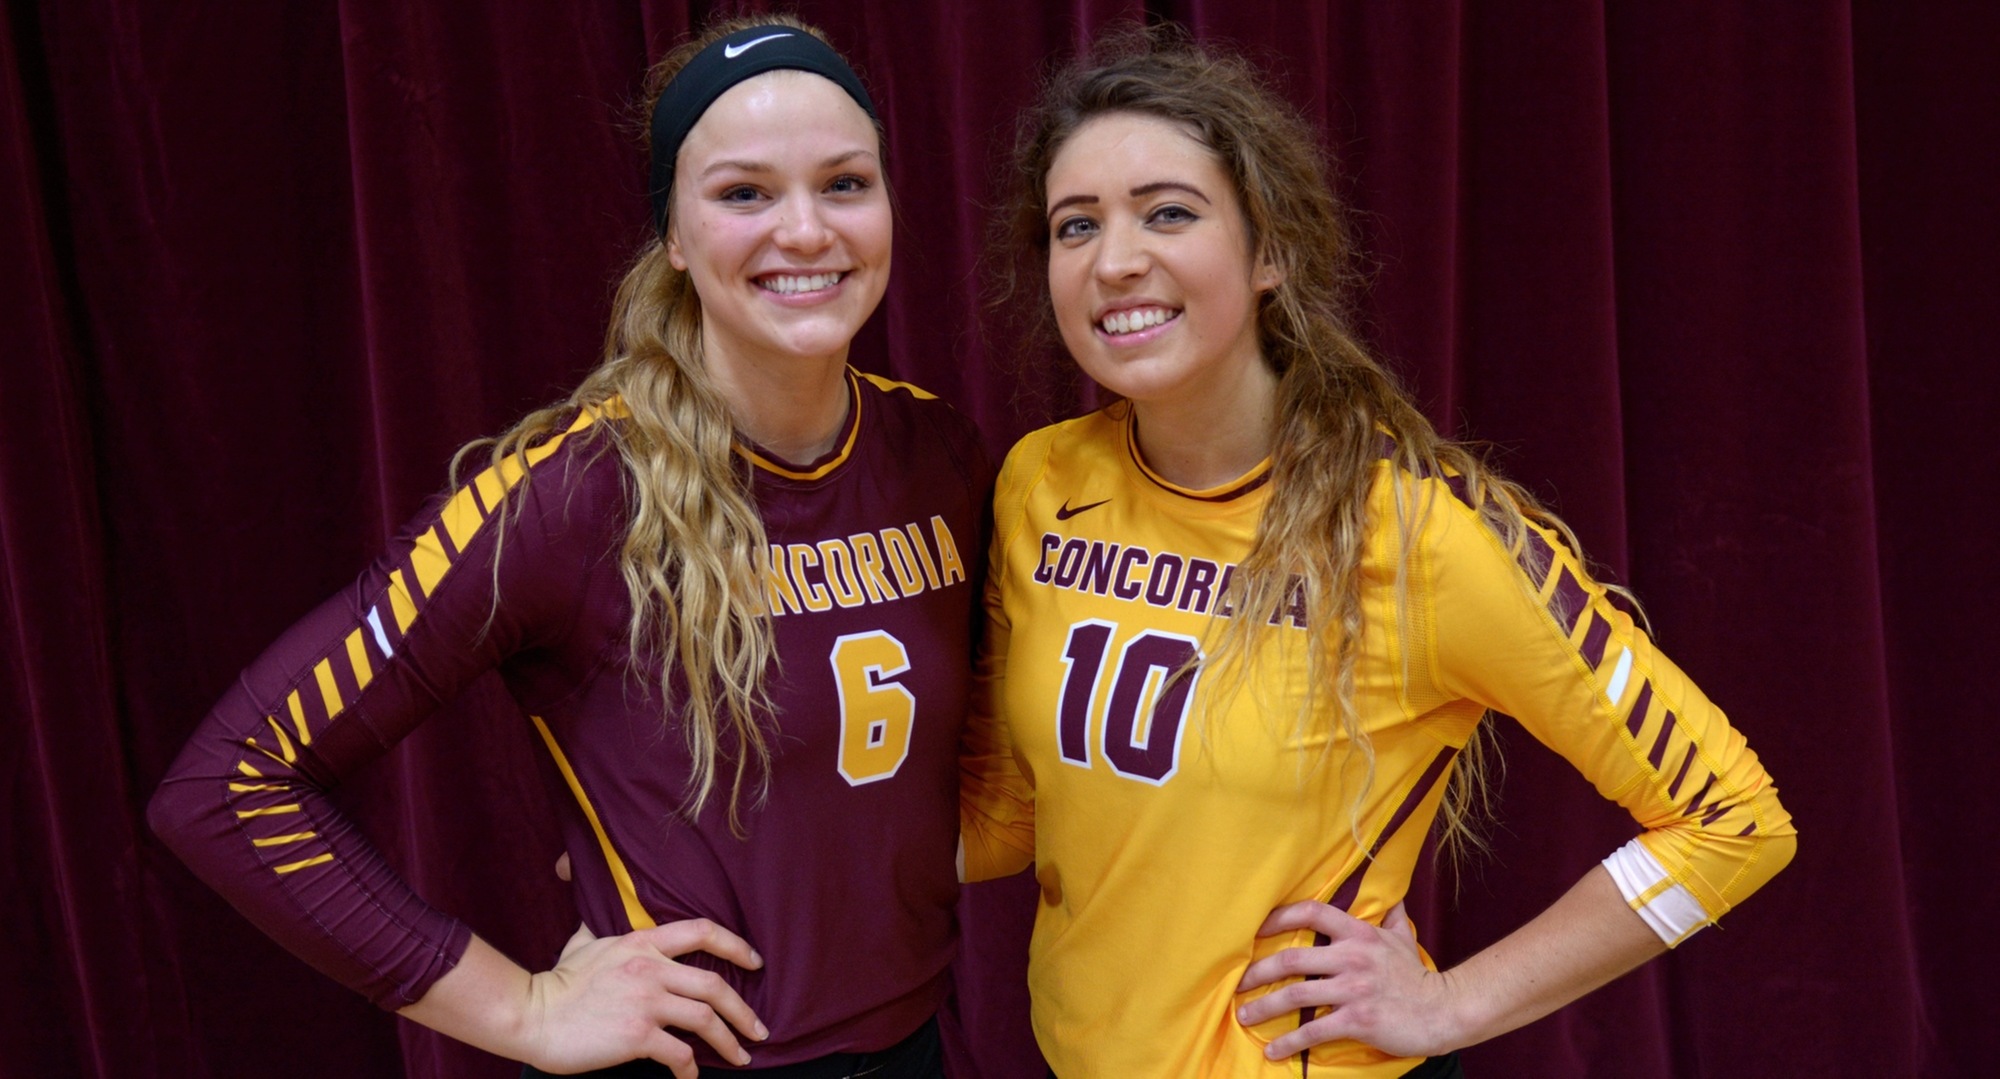 Cobber outgoing players Emily Friedrich (L) and Stephanie Baker were honored befor the Cobbers' upset win over #11 Gustavus.